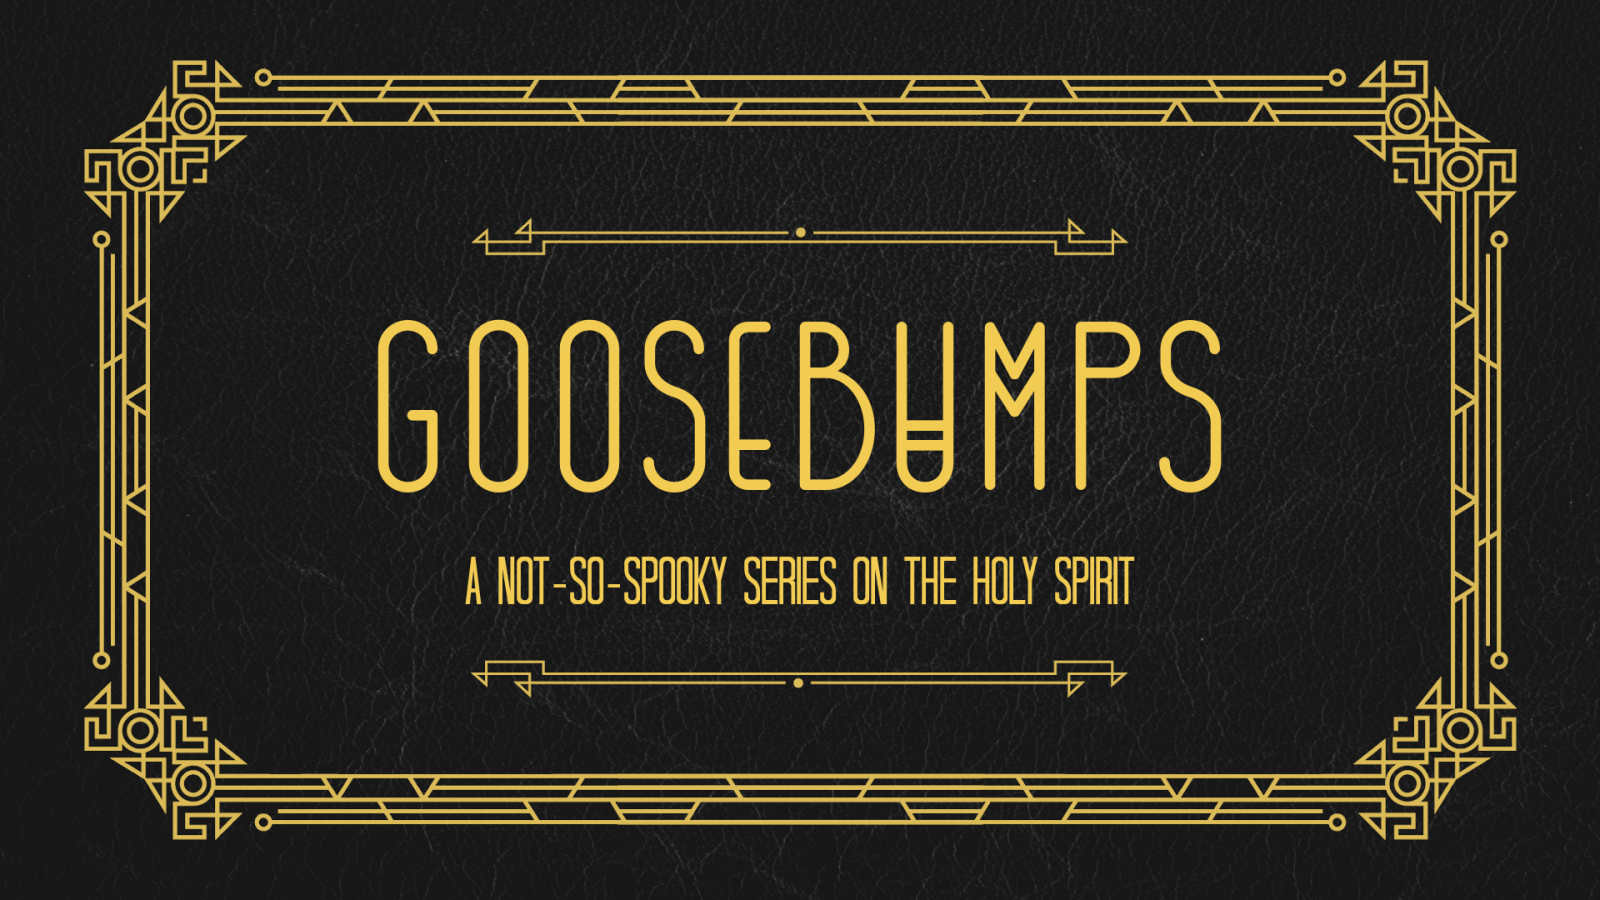 Goosebumps - A Not-So-Spooky Series on the Holy Spirit